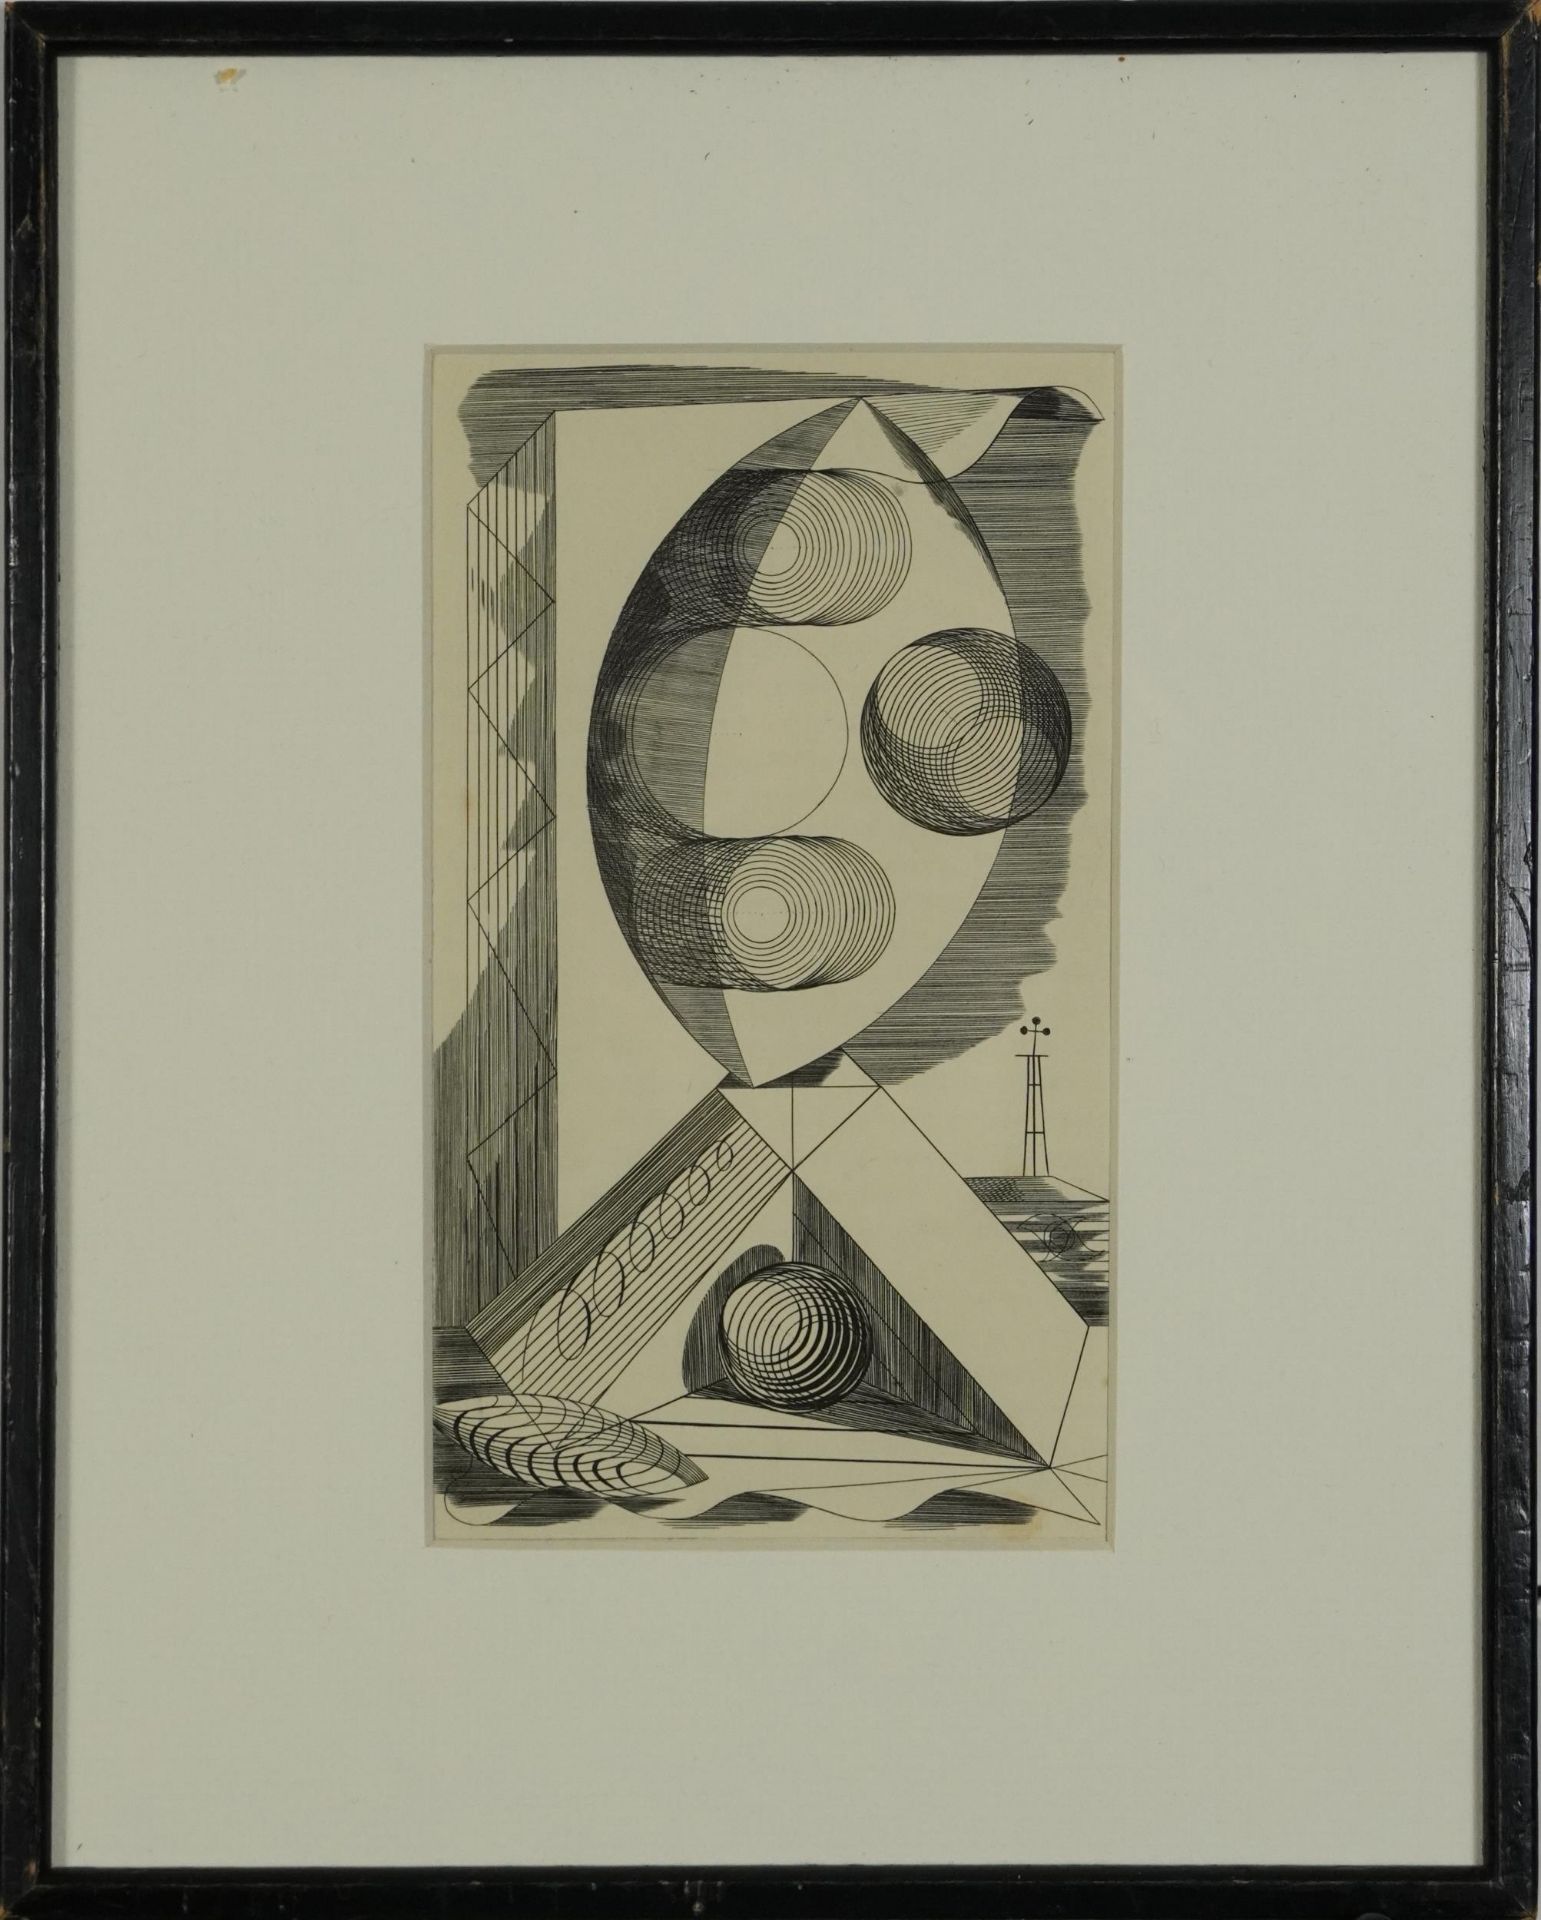 Edward Bawden - Abstract design, copper engraving, various inscriptions verso including Published by - Image 4 of 8